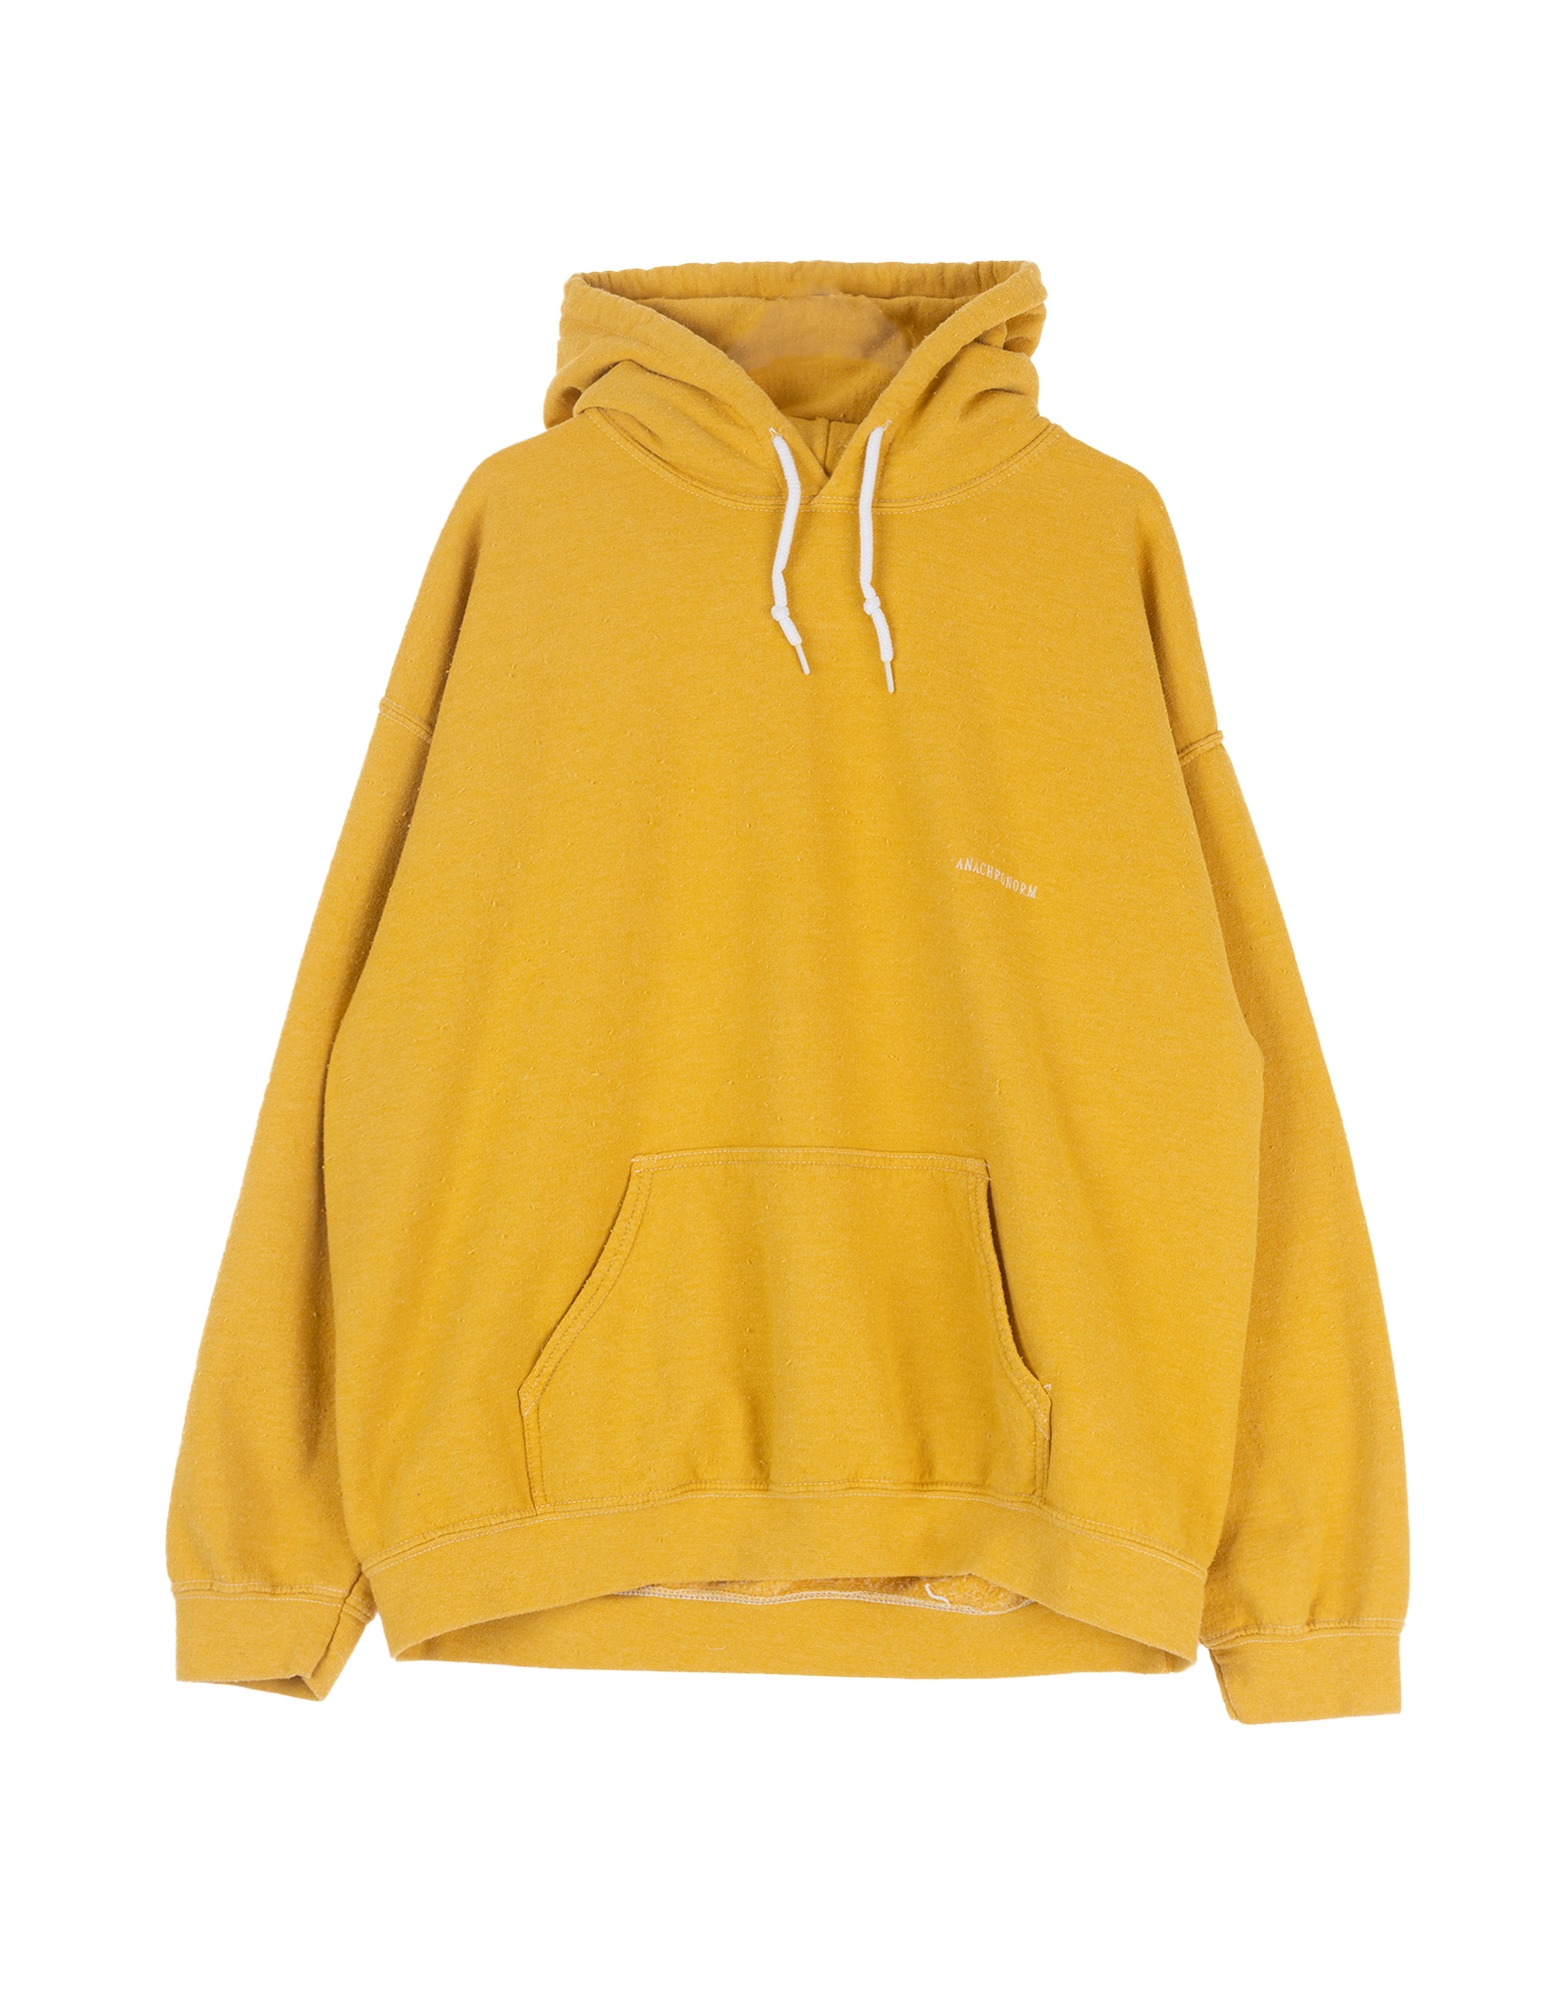 AN275 Dyed 50/50 Napping Parka (Yellow)